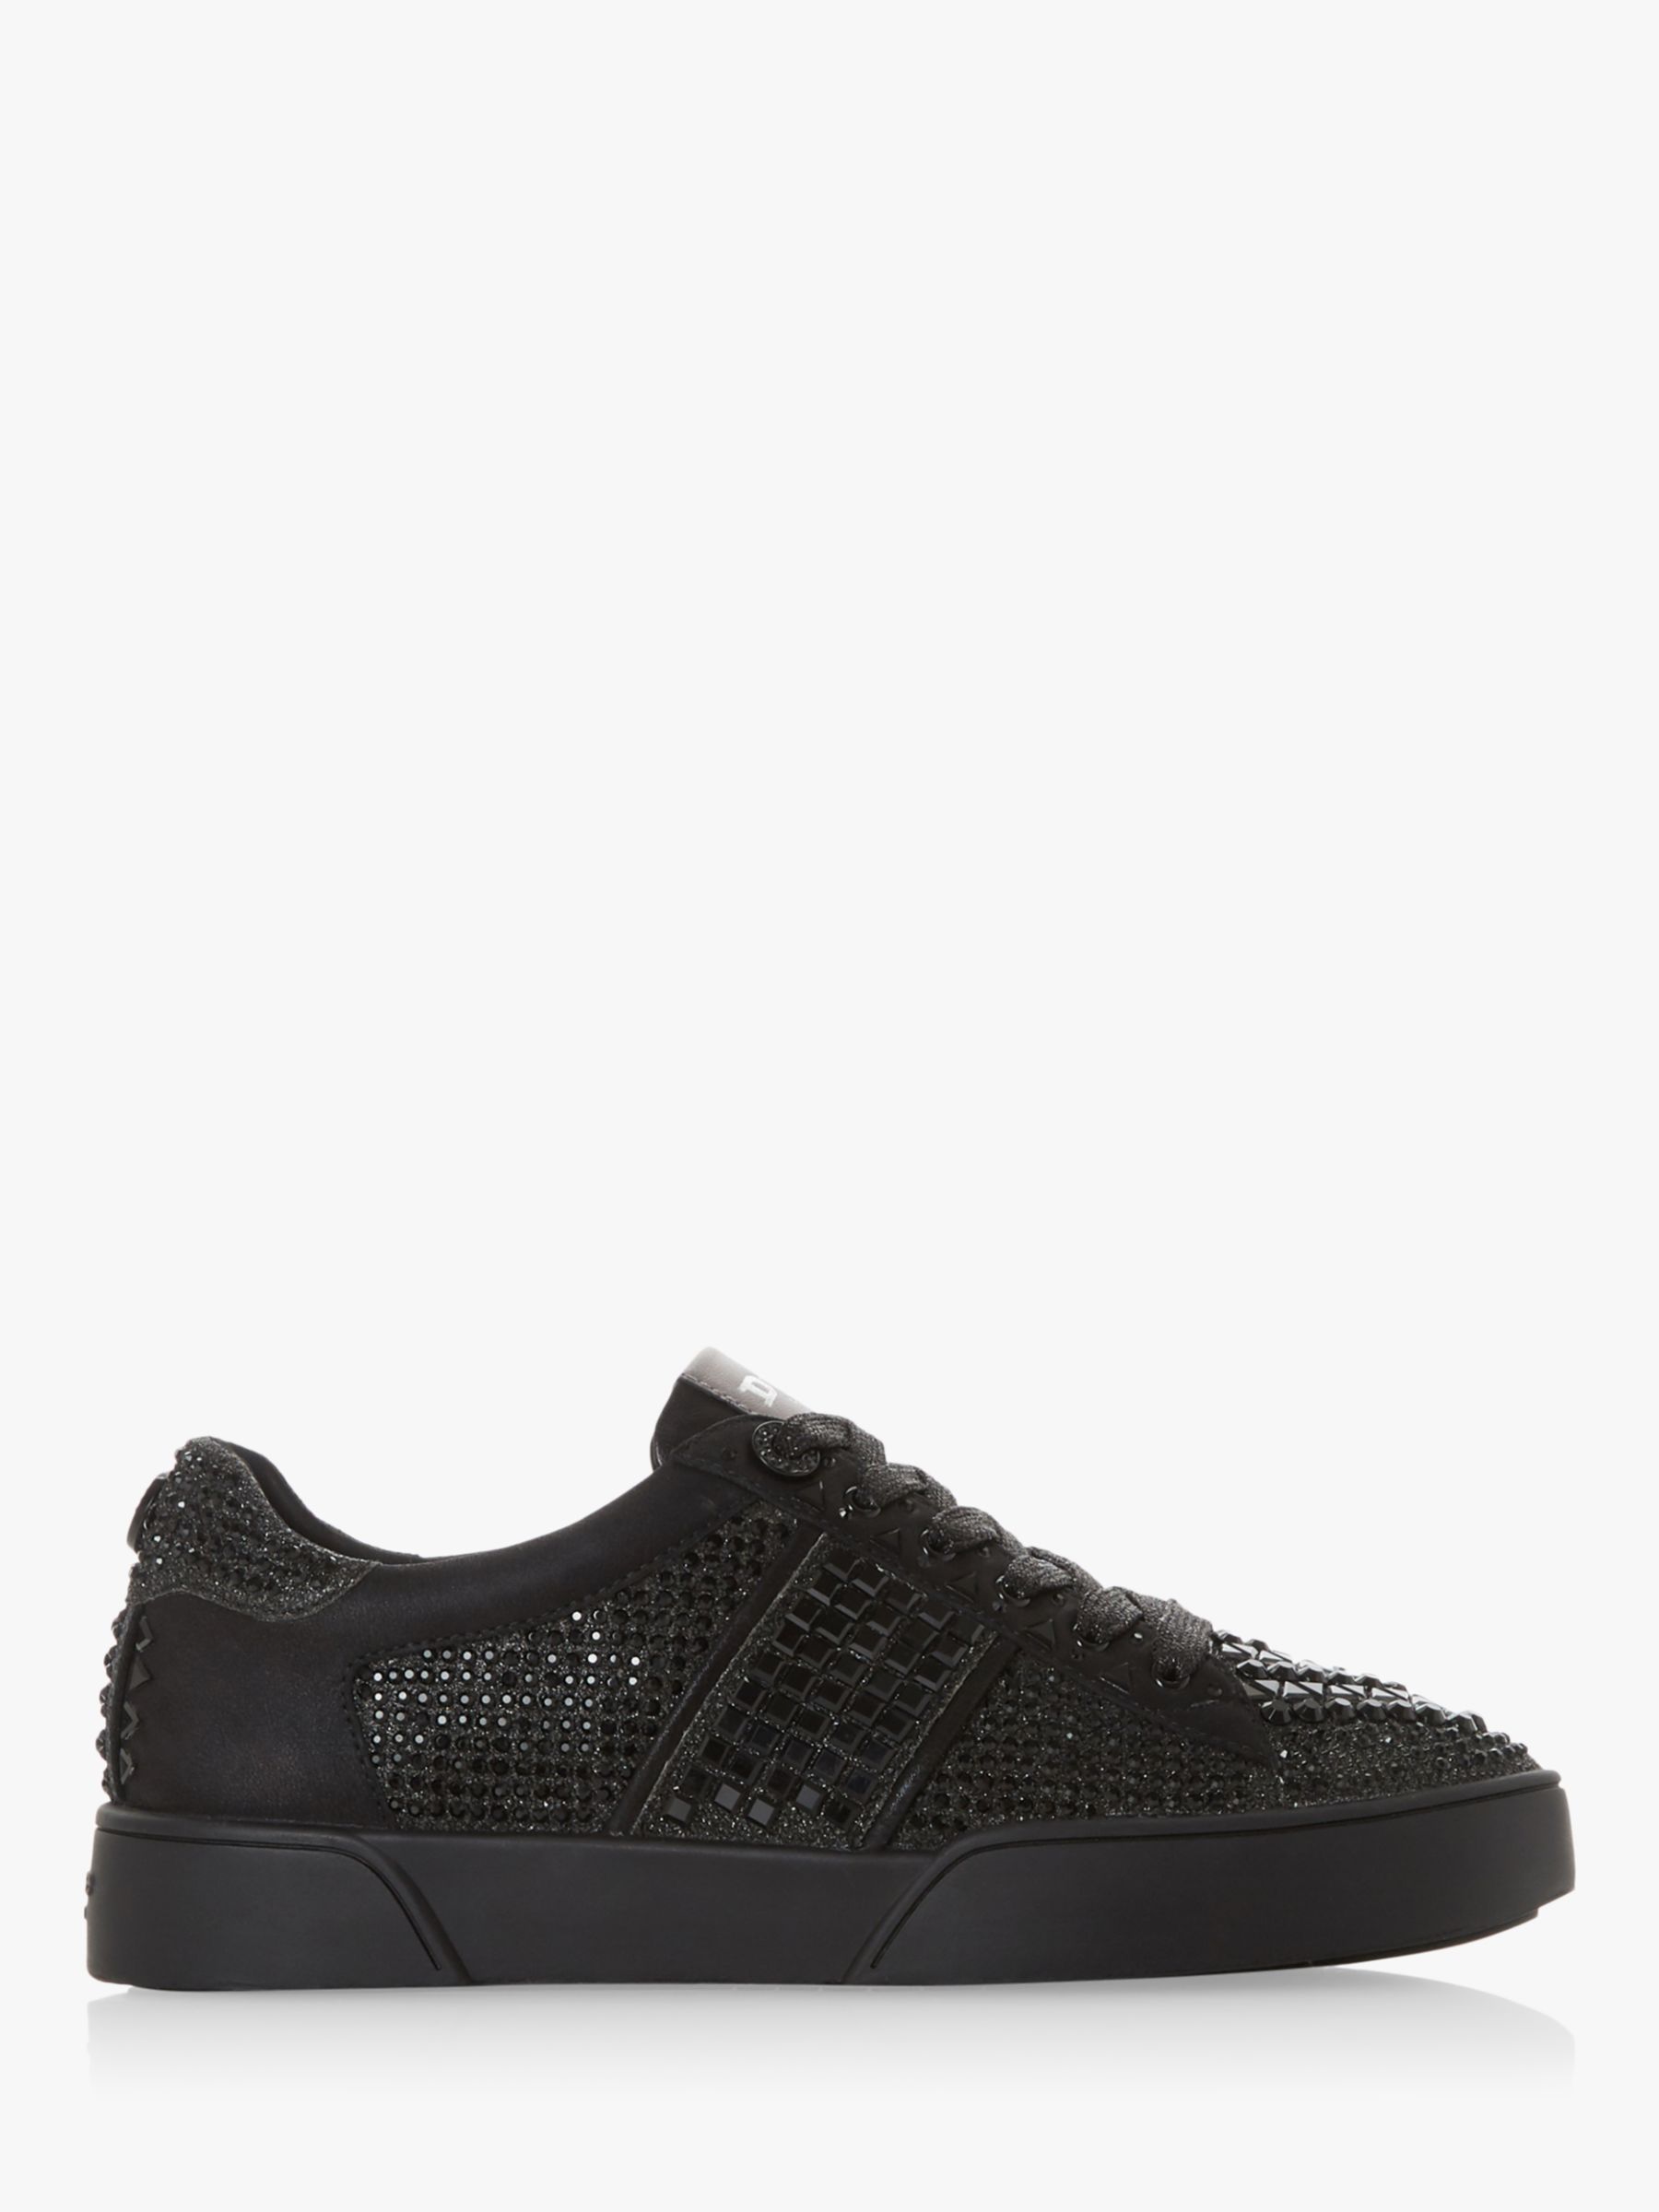 Dune Elsie Embellished Lace Up Trainers